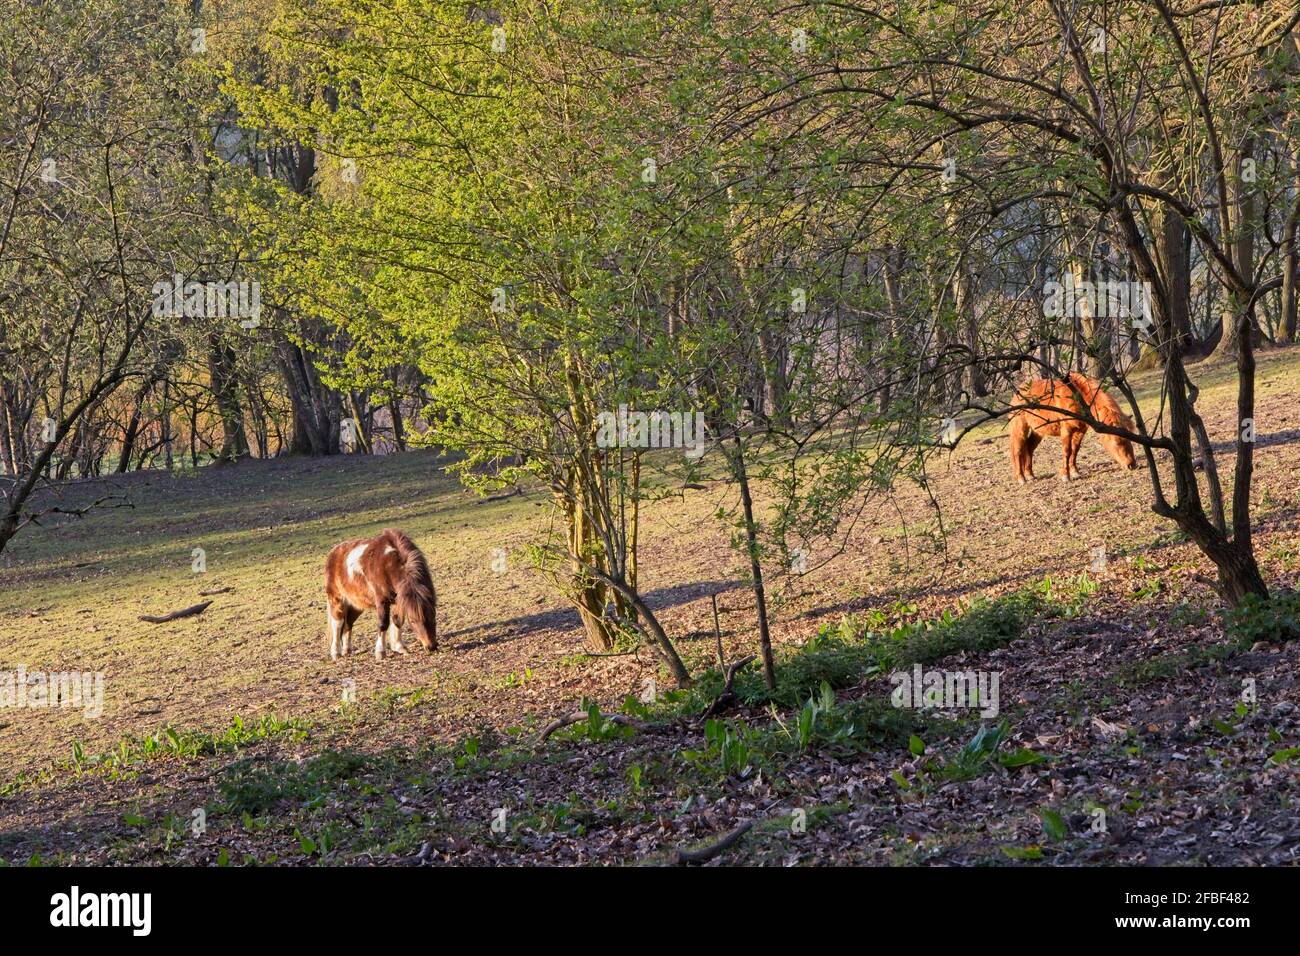 Ponies grazing in a field in the Derwent Valley Country Park, Winlaton Mill, Gateshead, Tyne and Wear. Stock Photo